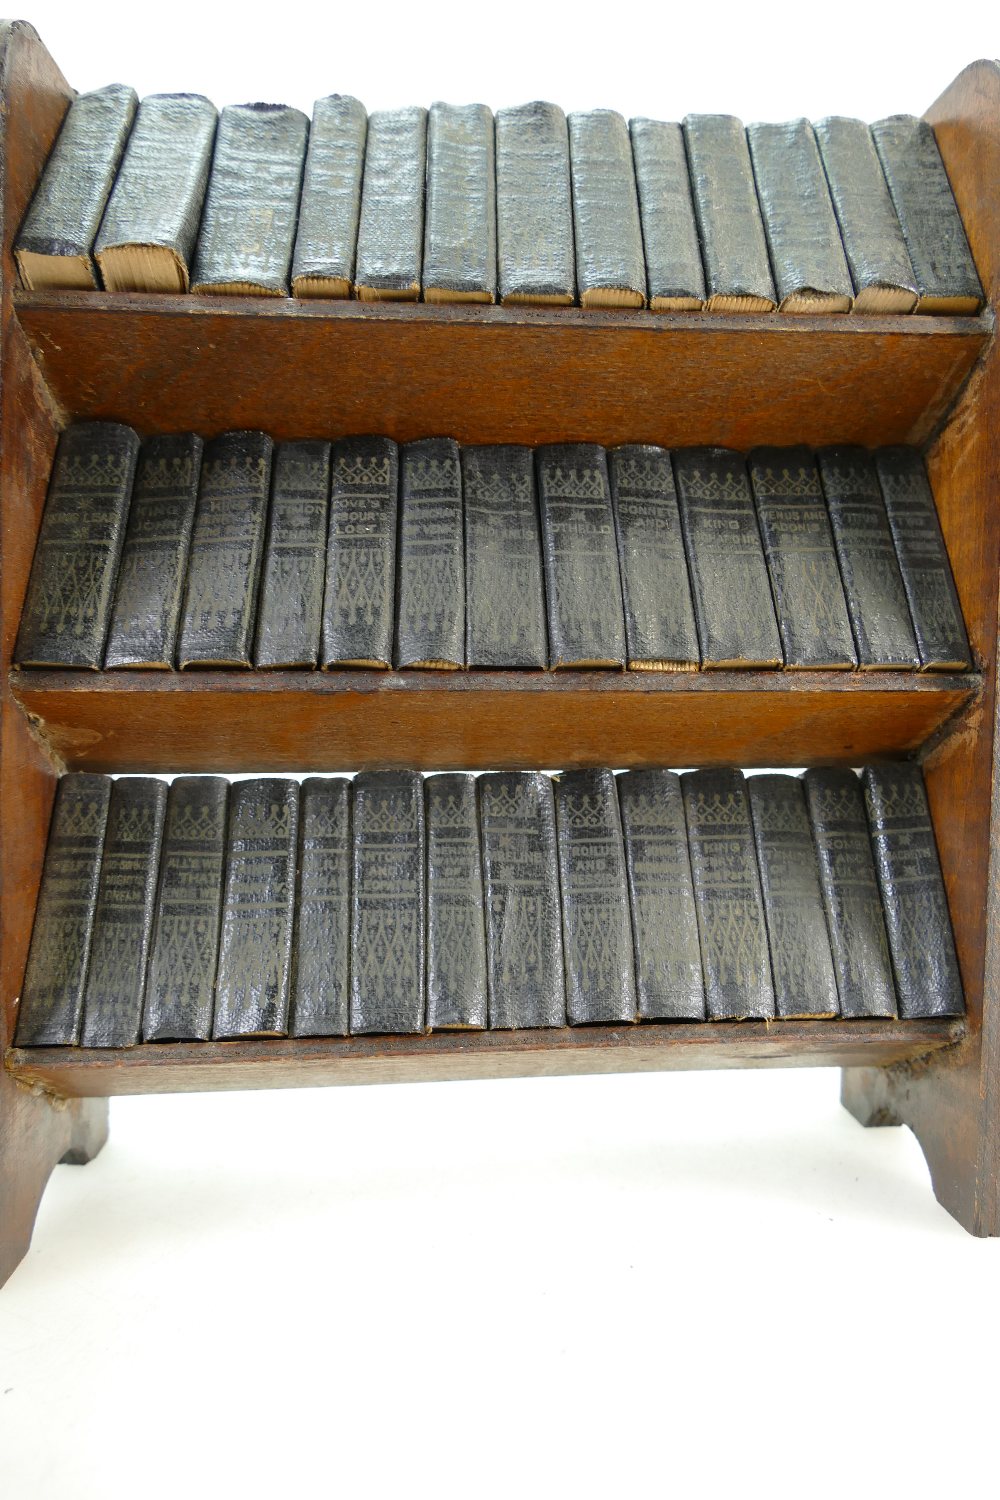 Shakespeare 40 x miniature volumes: Volumes housed in small wooden mini bookcase, - Image 4 of 4